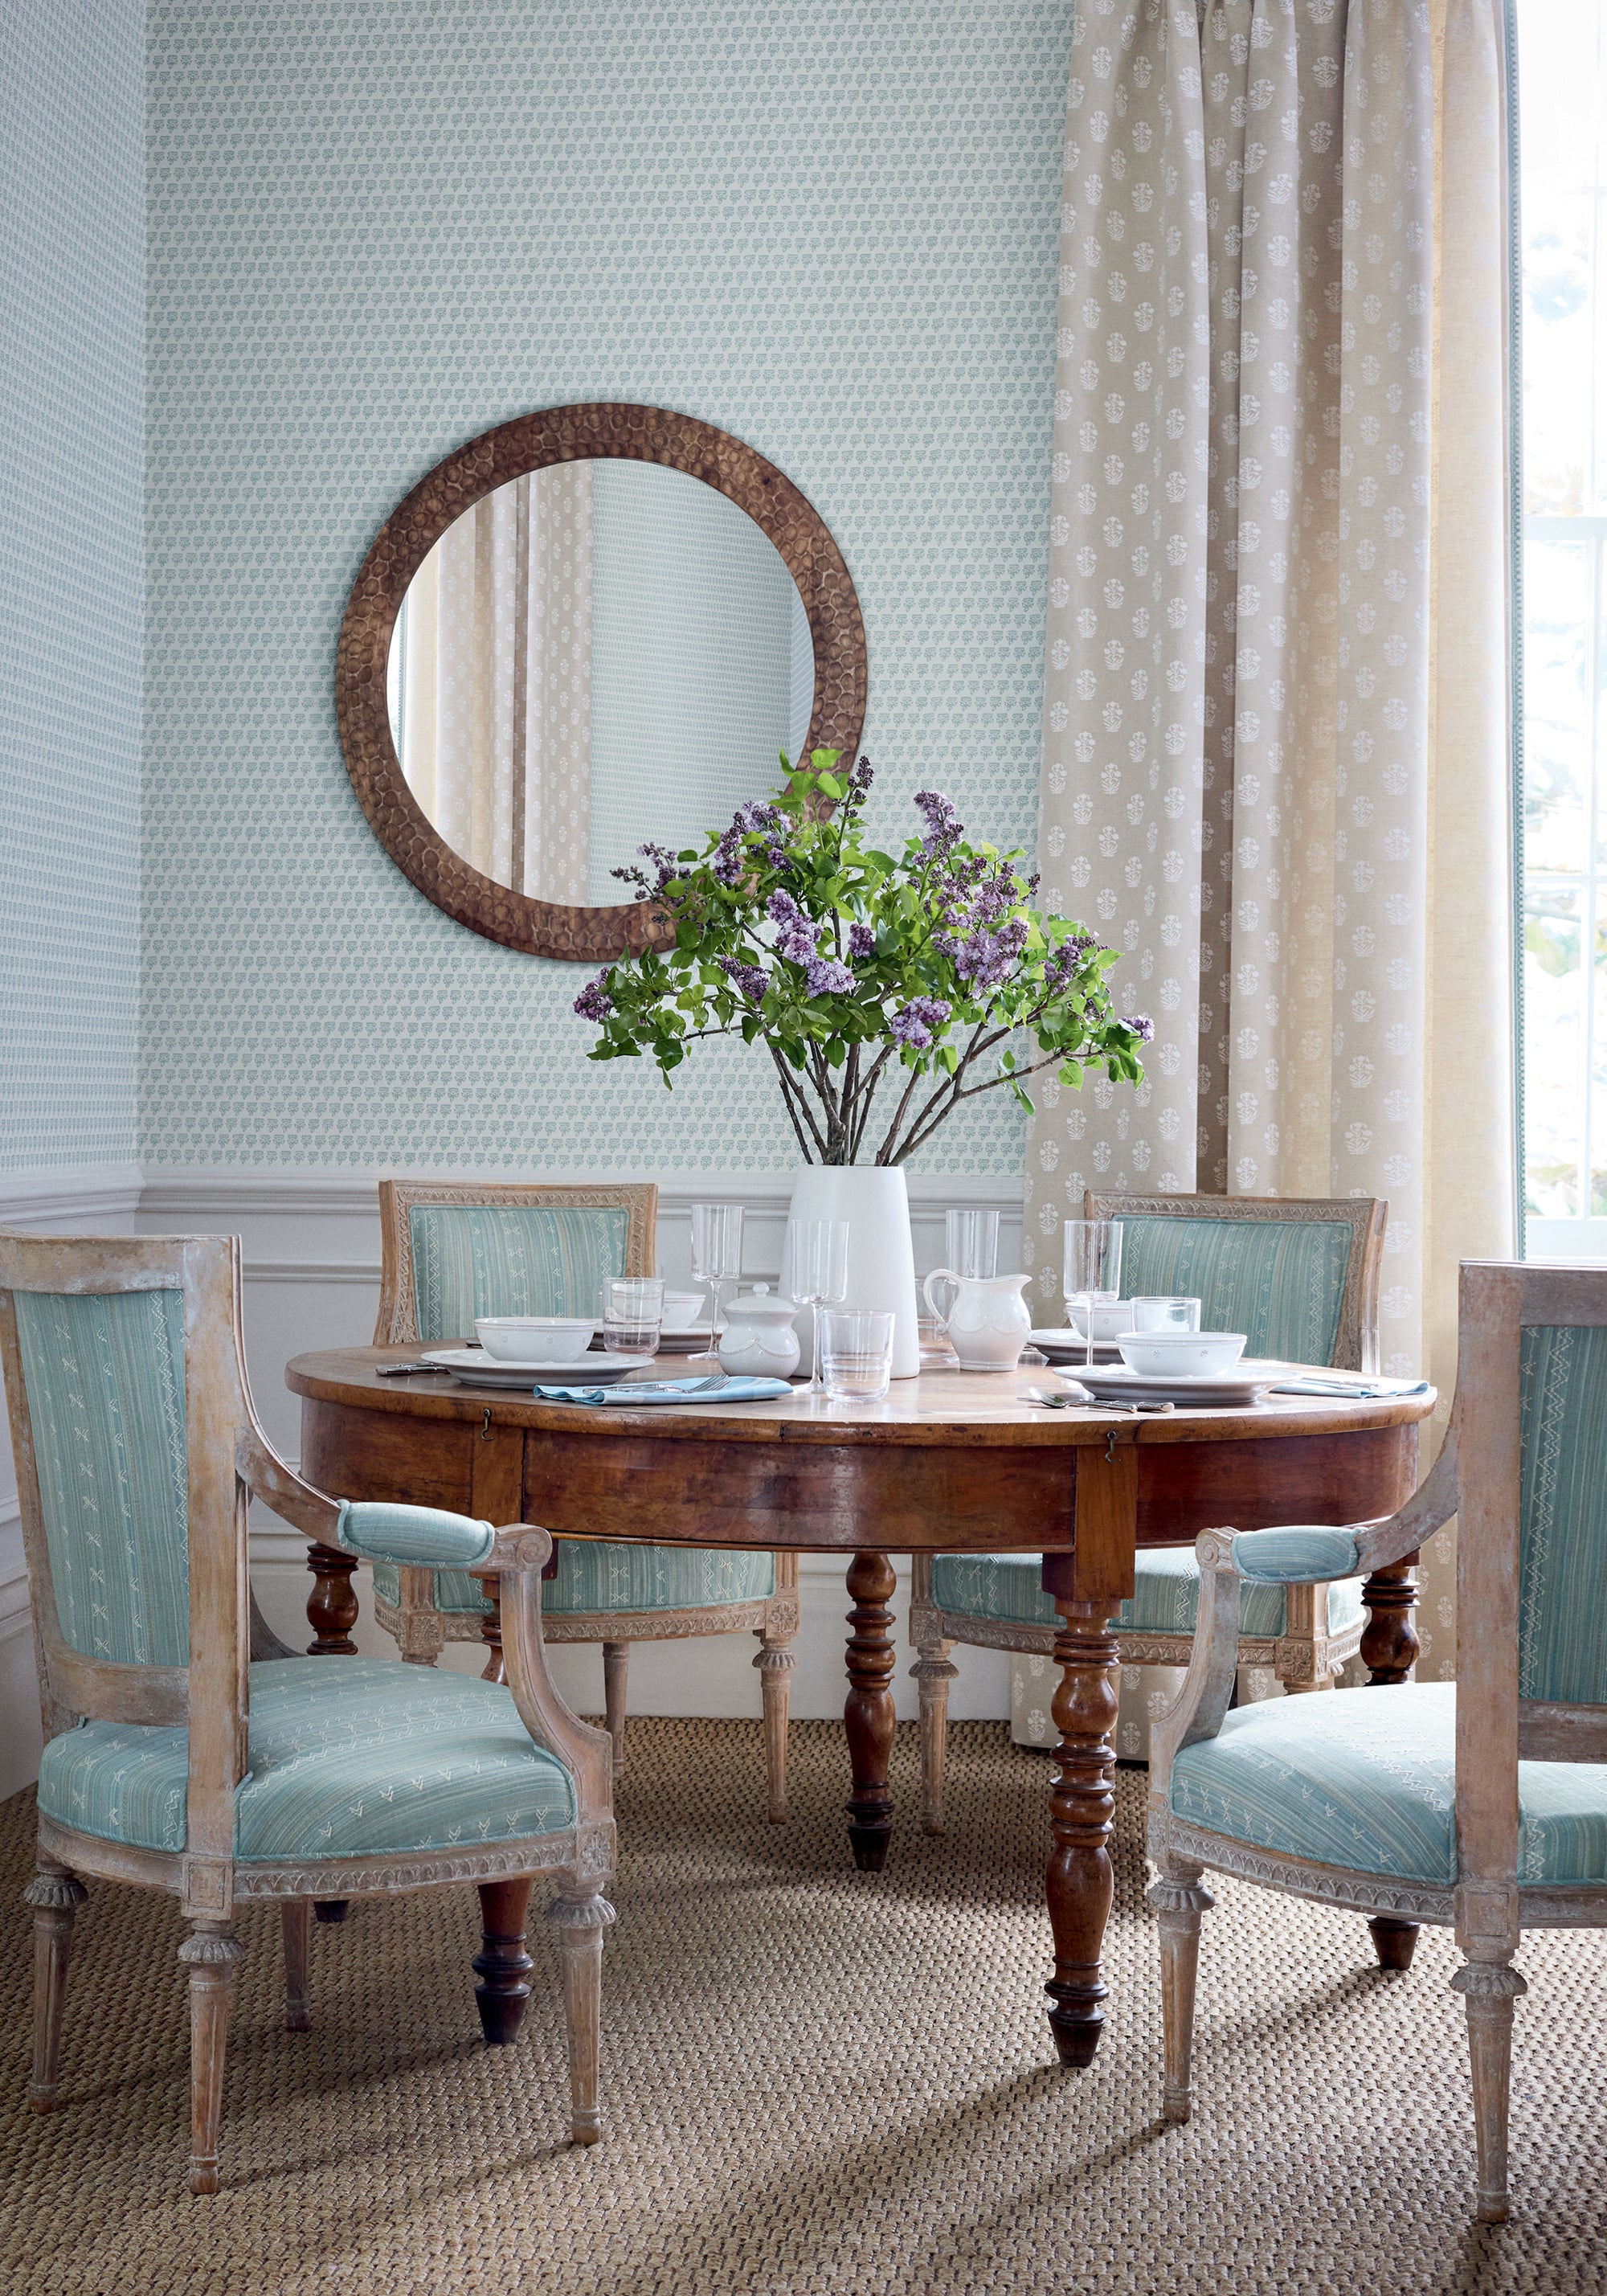 Dining room chairs featuring Charter Stripe Embroidery fabric in seaglass color - pattern number W736455 - by Thibaut in the Indienne collection